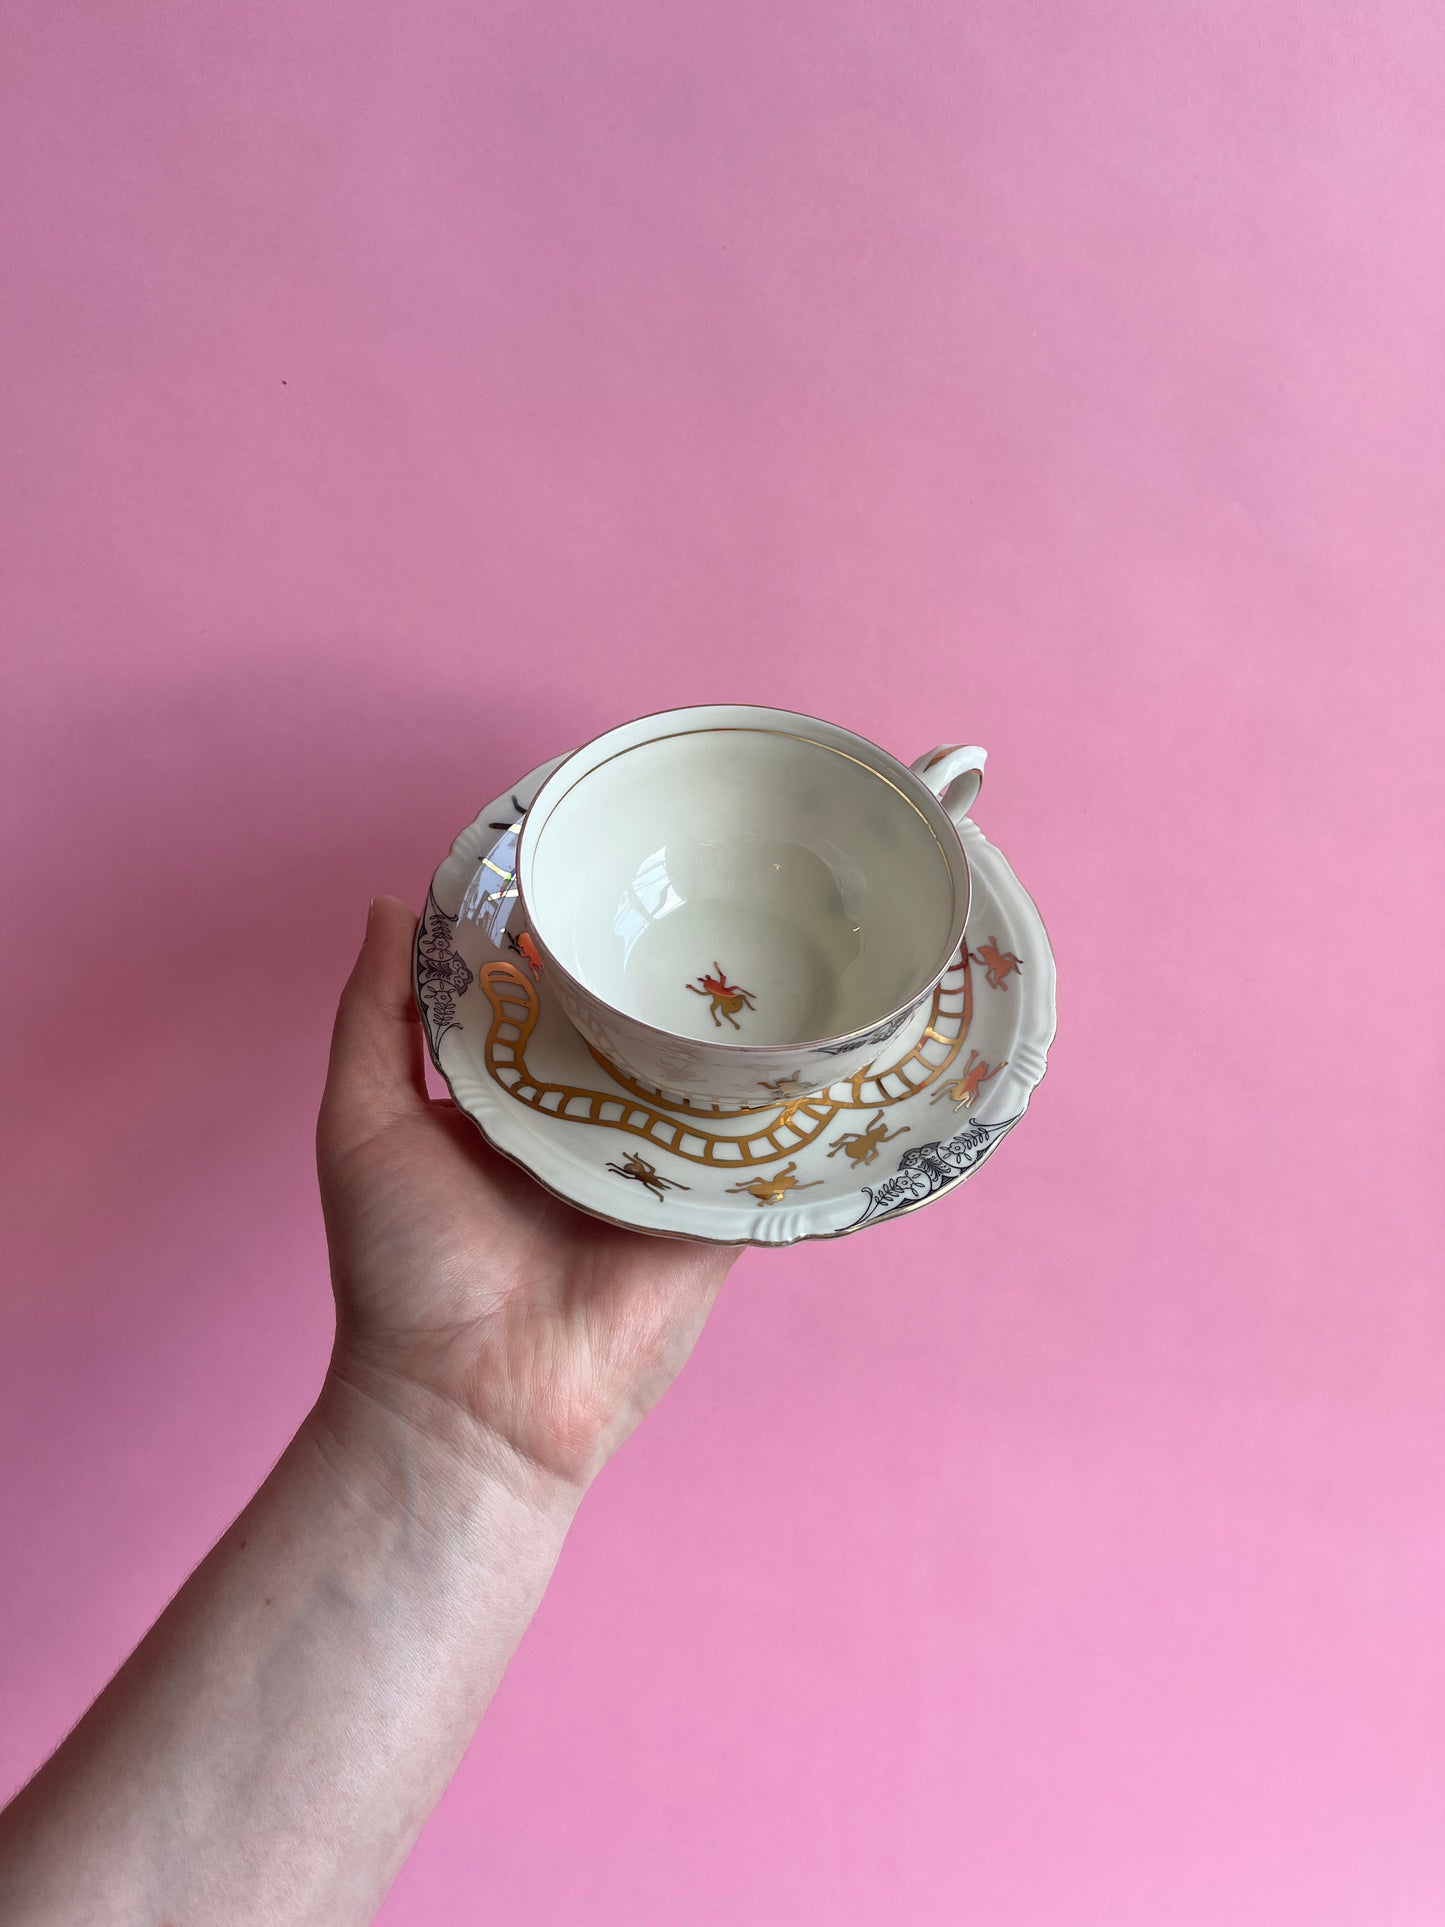 Thrifted Gold: Golden Bugs Teacup And Saucer